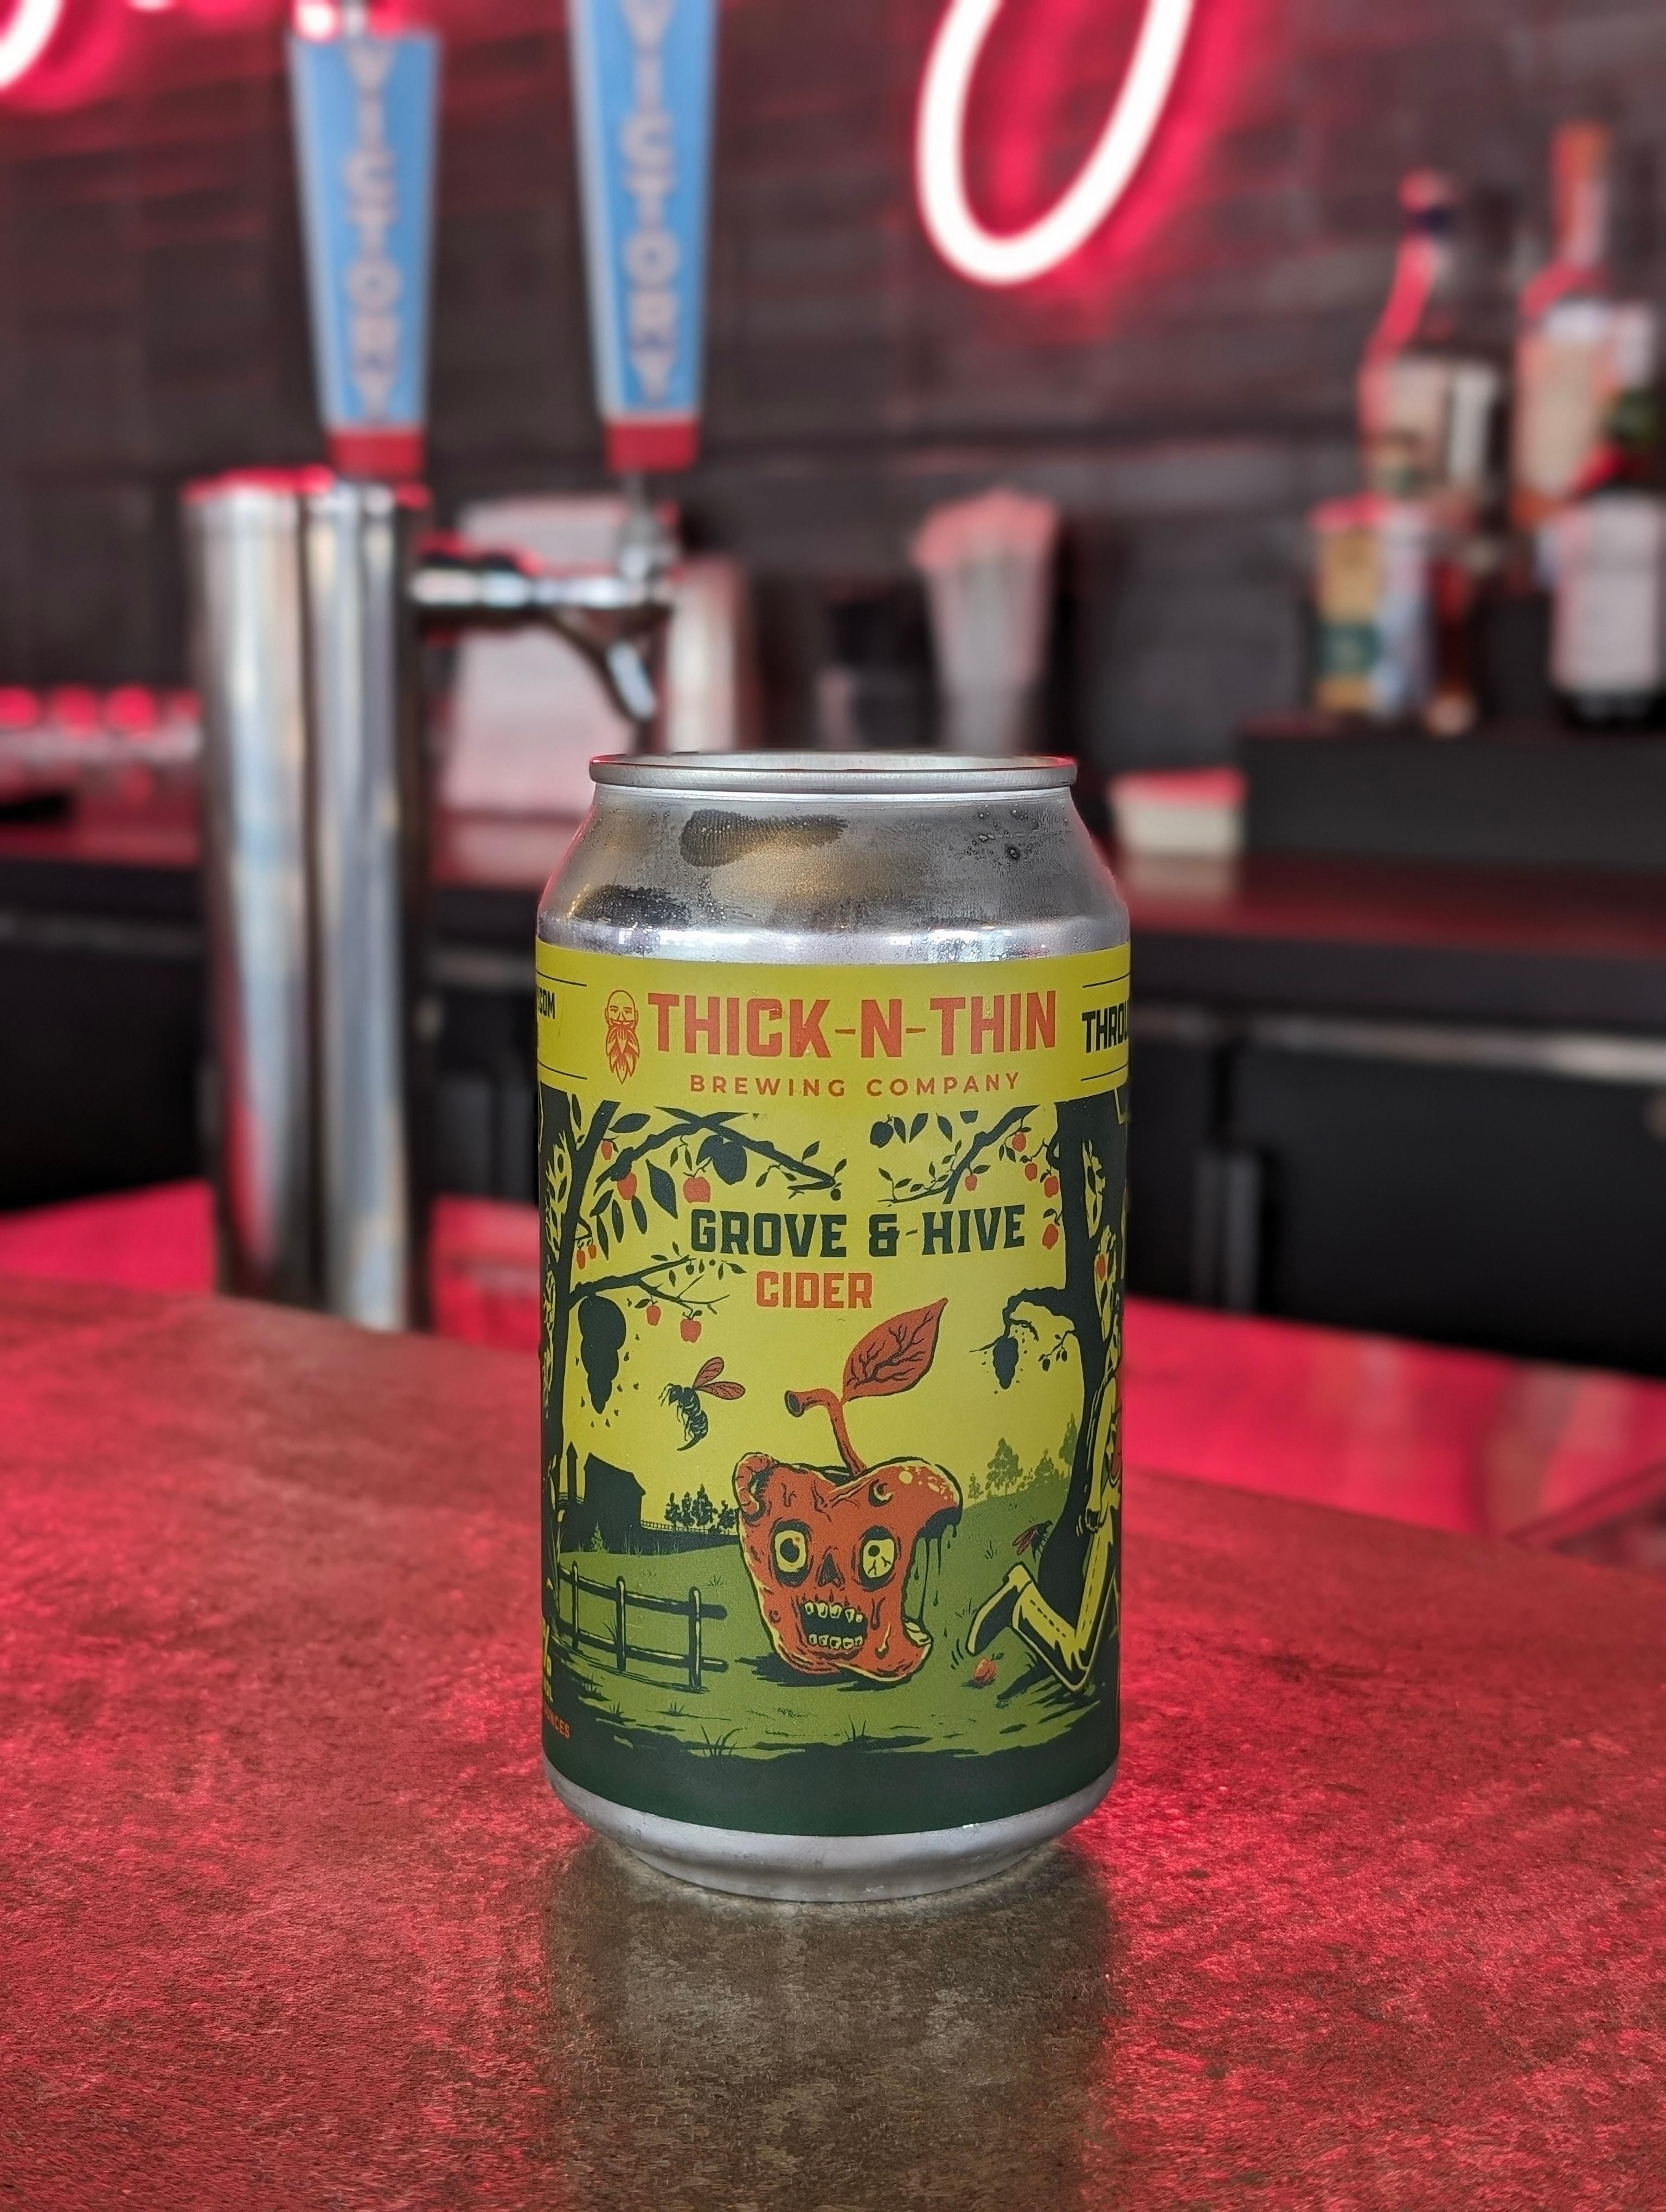 Grove & Hive Hard Cider - Thick 'n Thin Brewing Co.